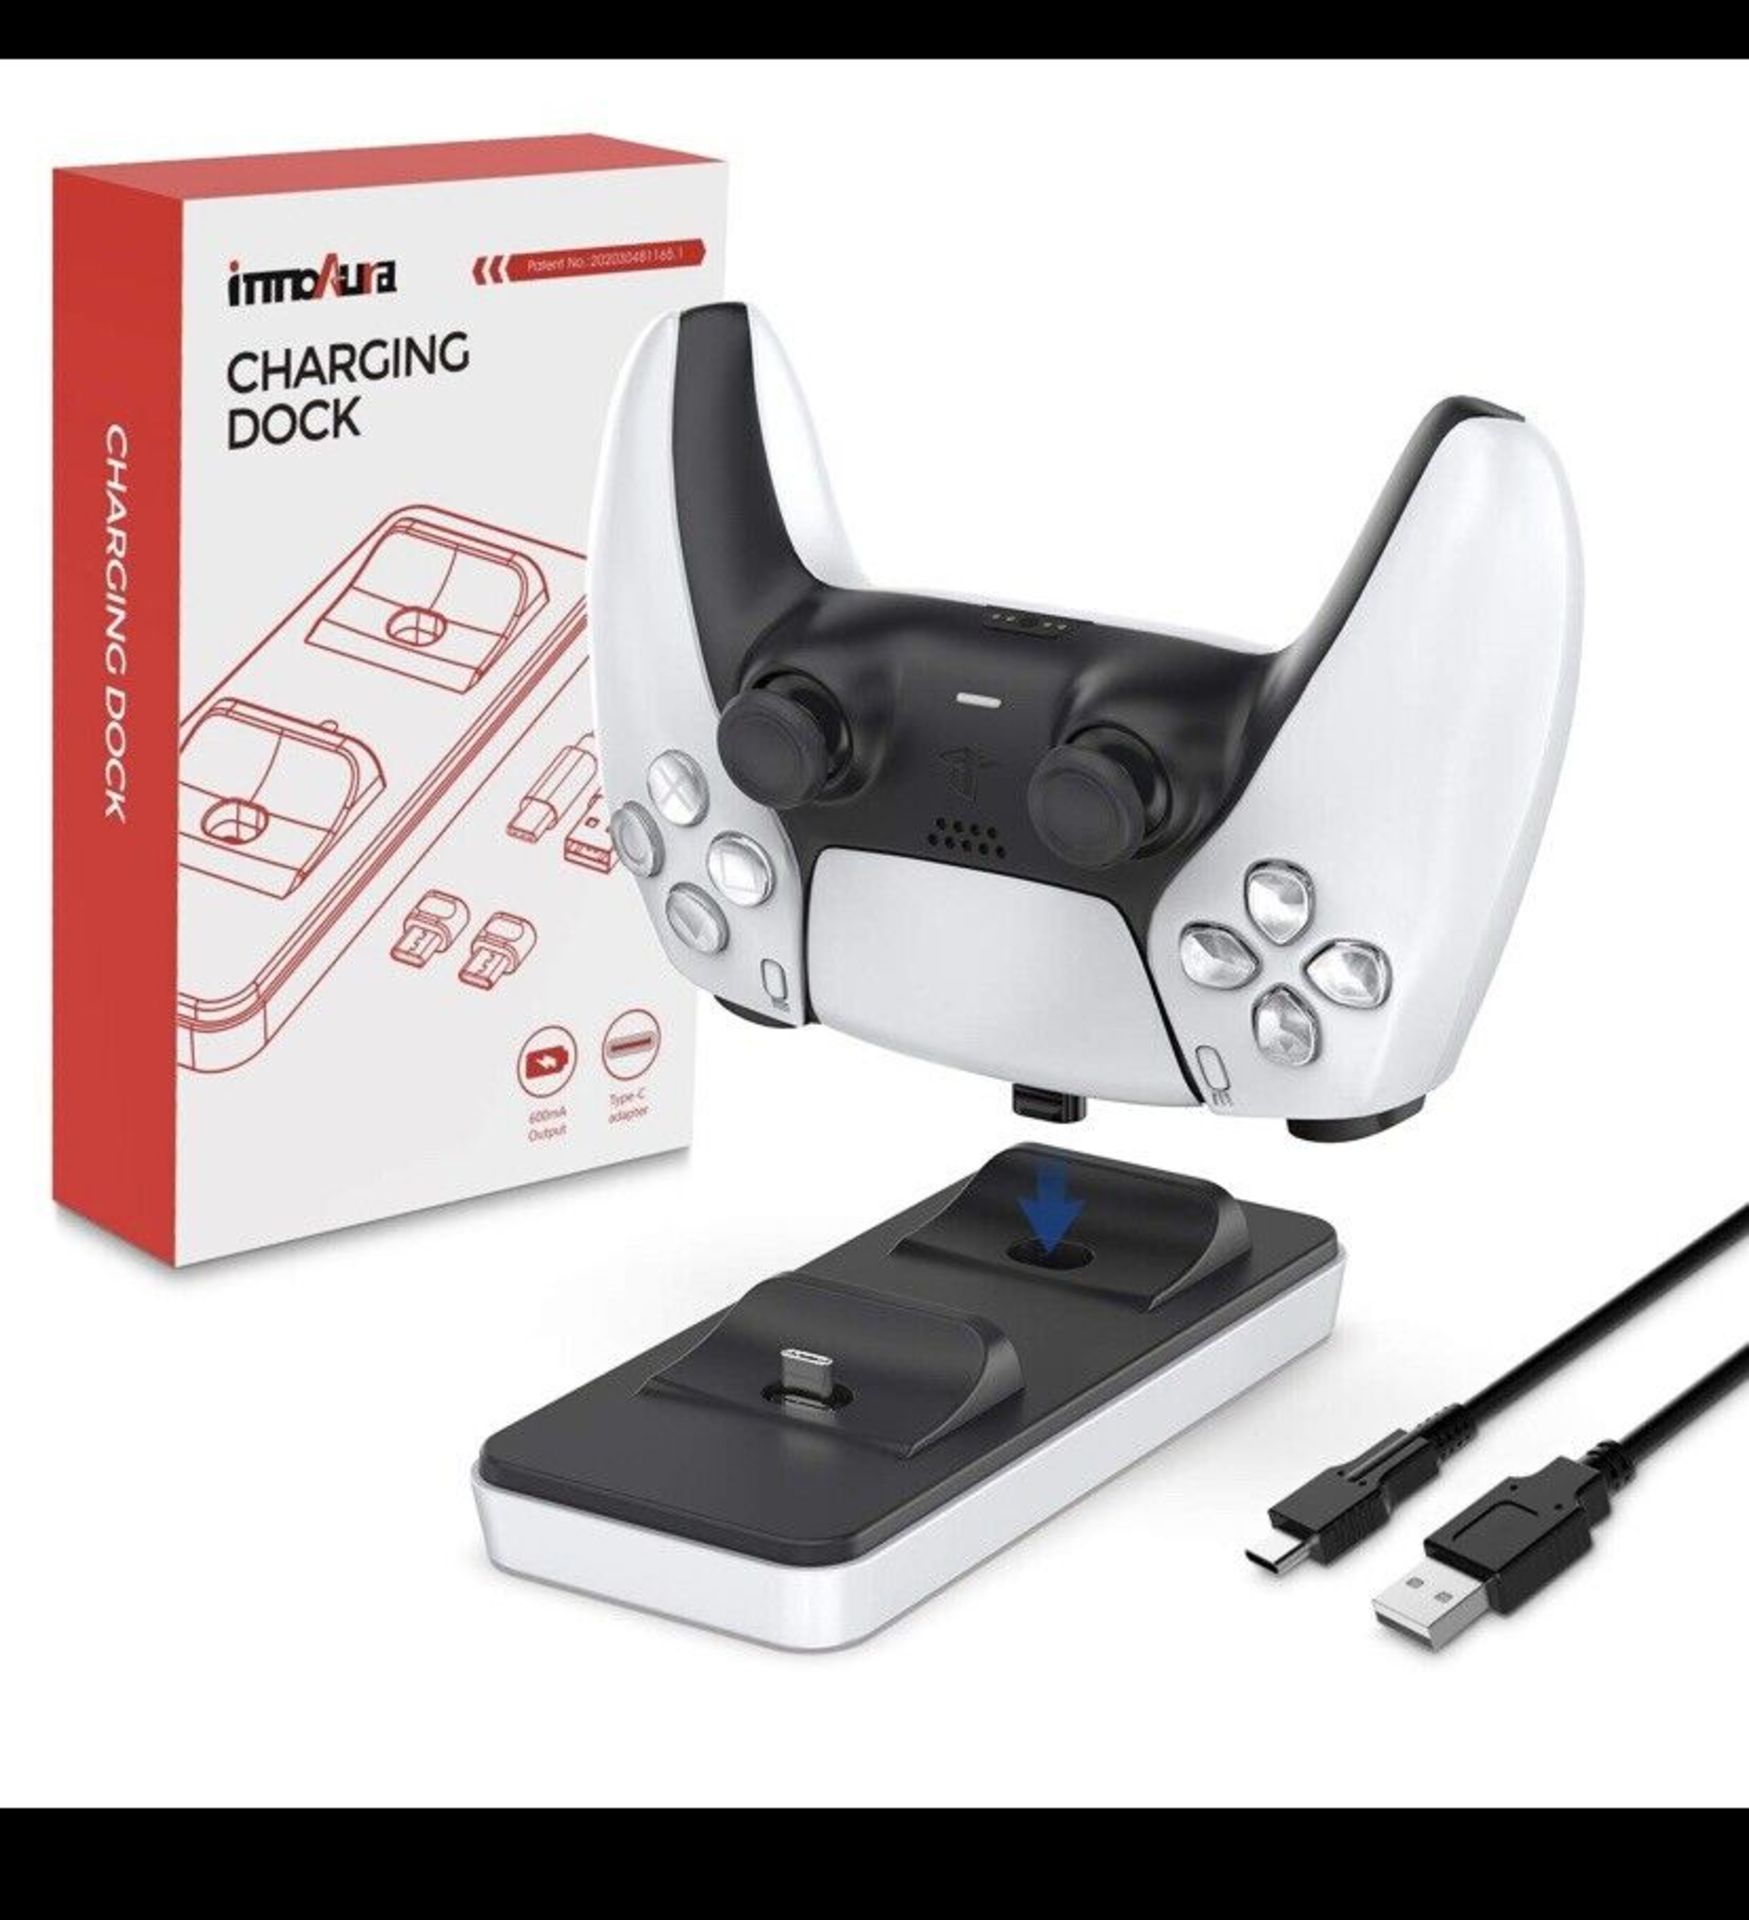 5 x PS5 Controller Charger, InnoAura Charging Dock For PlayStation 5 DualSense Controller - Image 2 of 2